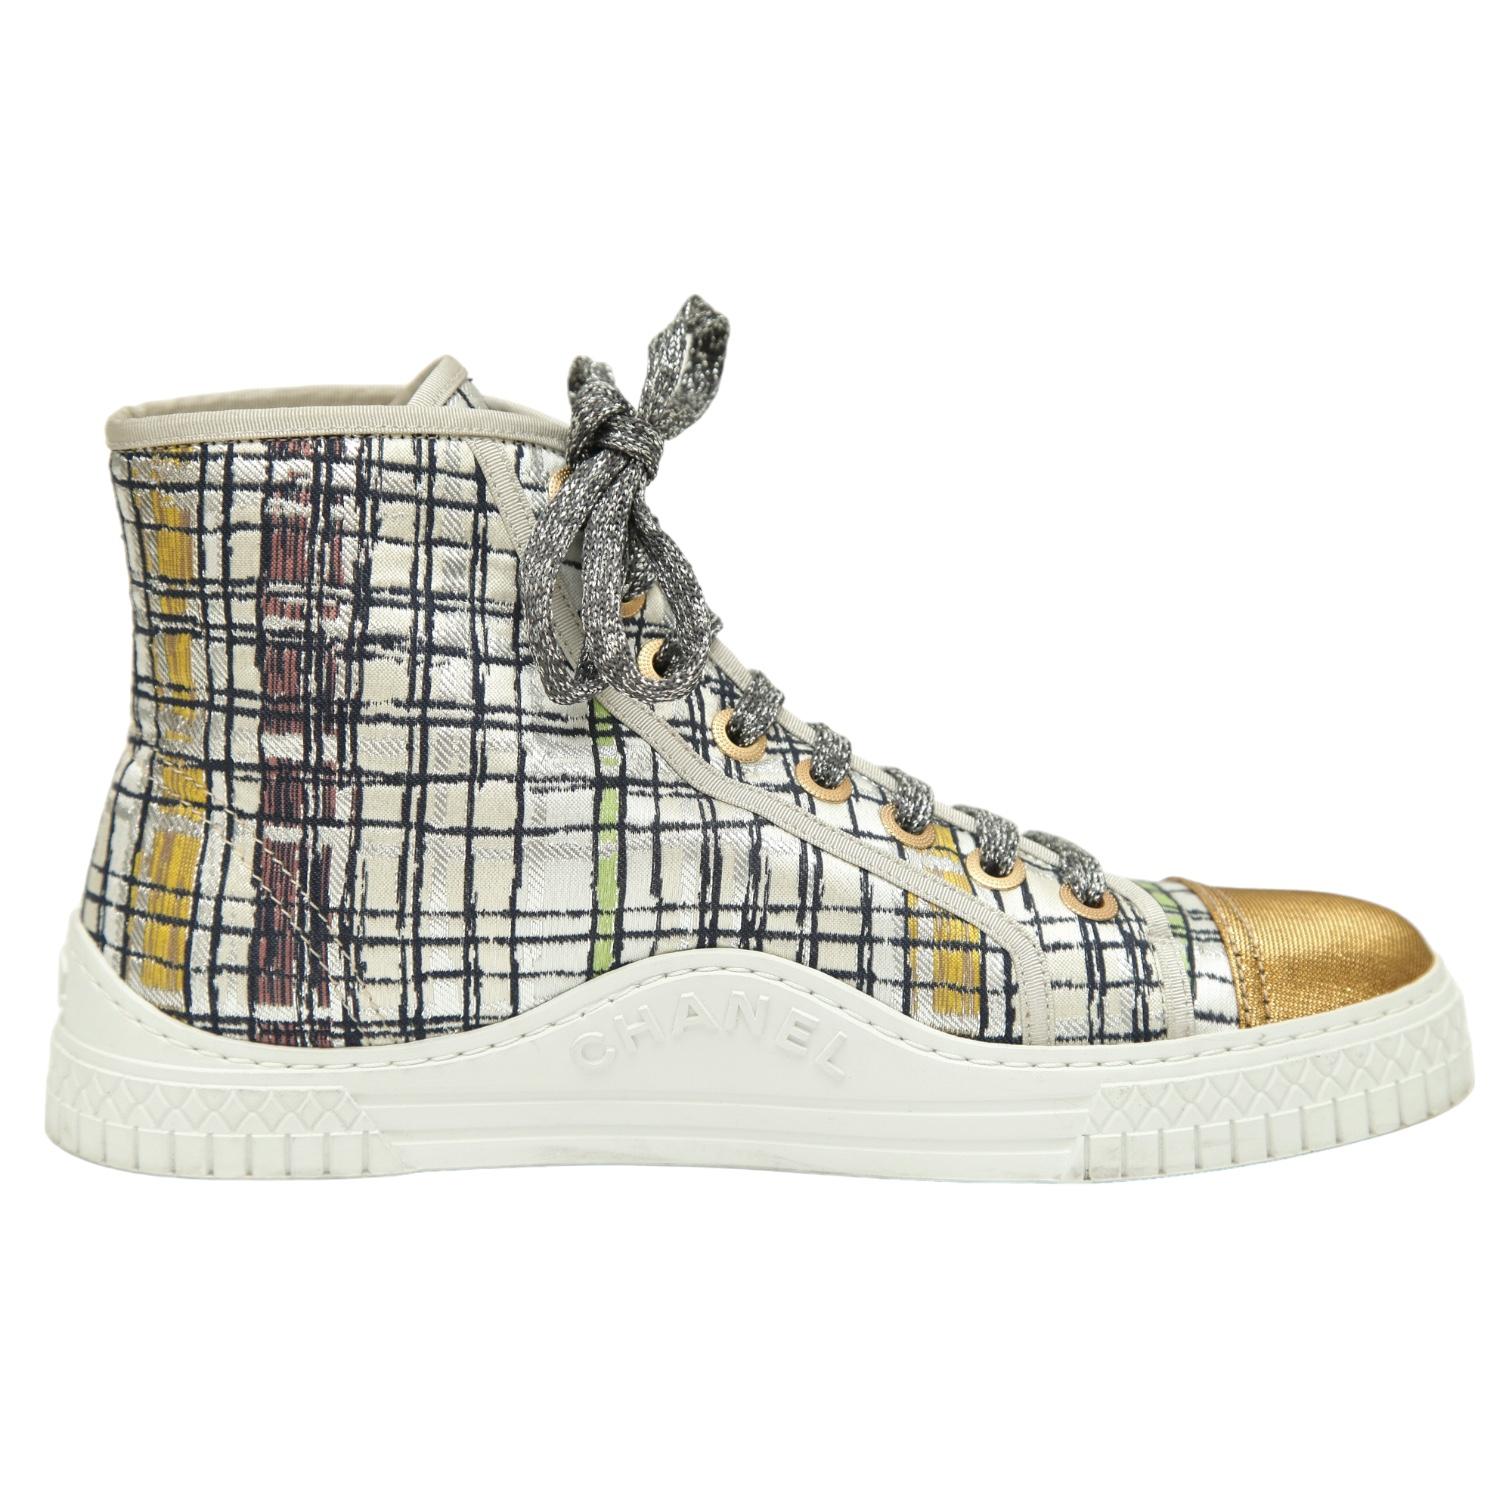 
GUARANTEED AUTHENTIC CHANEL 17C Tweed High Top Sneakers

Design:
- Tweed fabric uppers.
- High top.
- Lace up.
- Leather insoles.
- Rubber soles.
- Comes with dust bag.

Size: 39


Sneaker Measures (Approximate):
- Insole: 10